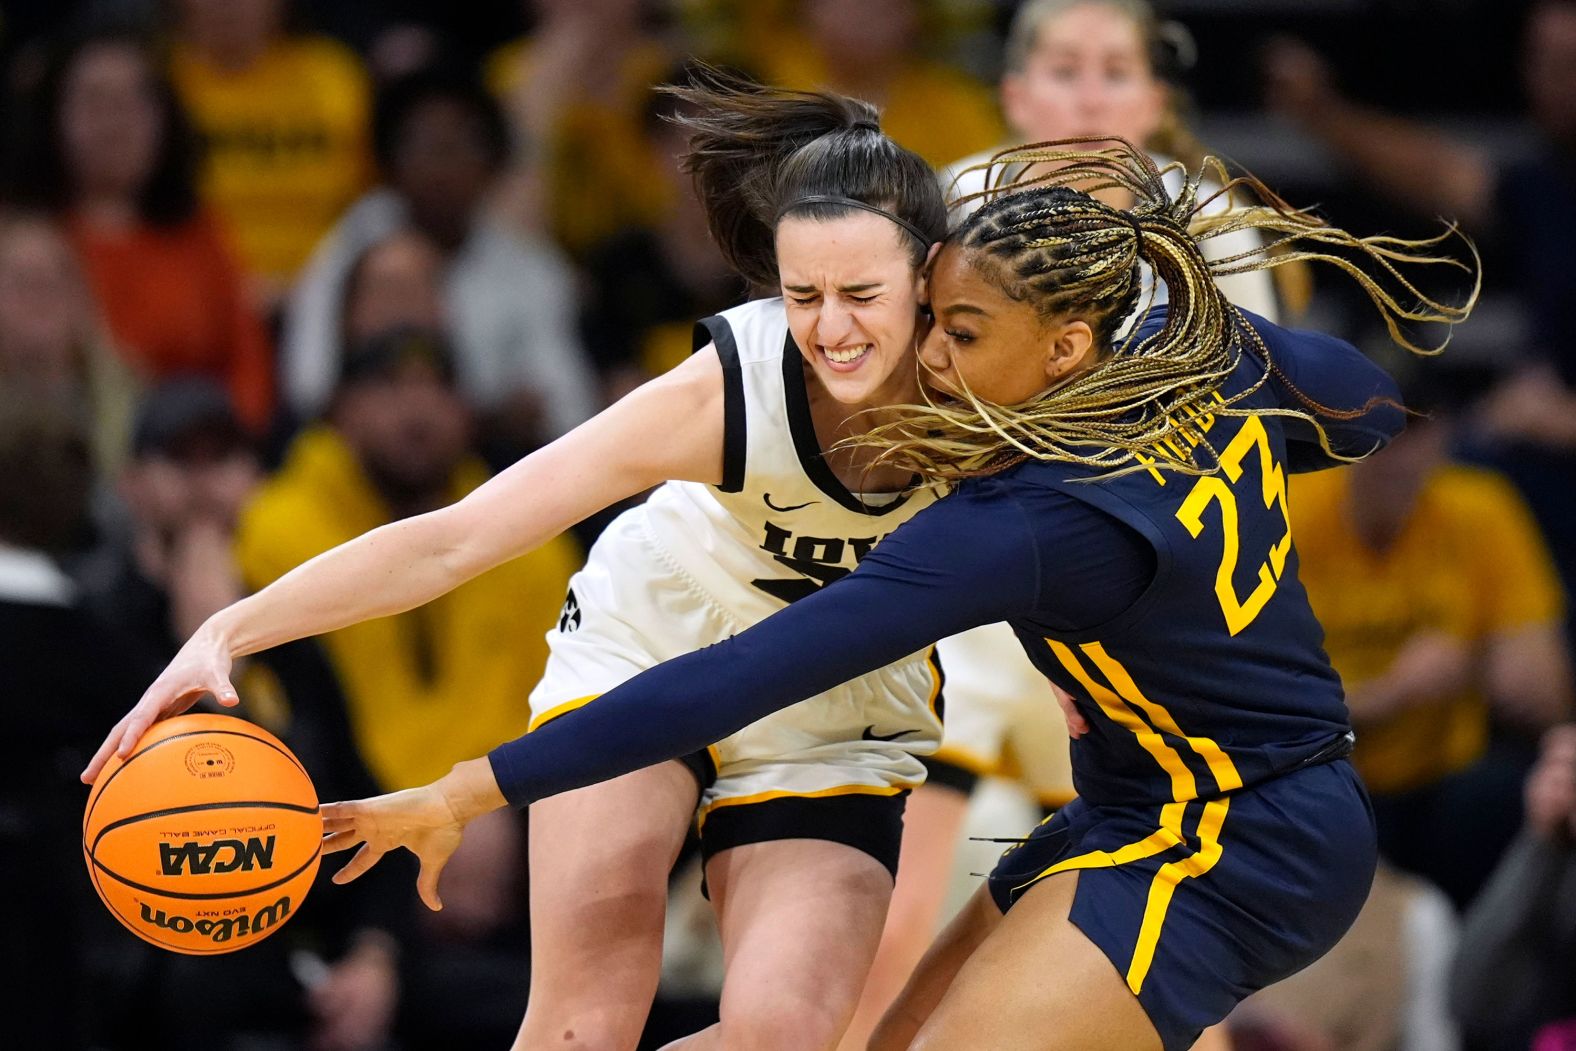 West Virginia guard Lauren Fields tries to steal the ball from Iowa guard Caitlin Clark during an NCAA Tournament game on Monday, March 25. <a href="index.php?page=&url=https%3A%2F%2Fwww.cnn.com%2F2024%2F03%2F25%2Fsport%2Fiowa-womens-basketball-ncaa-tournament-spt%2Findex.html" target="_blank">Iowa advanced to the Sweet Sixteen with a 64-54 victory</a>, and Clark's 32 points gave her the NCAA Division I women's record for most points scored in a single season (1,113).